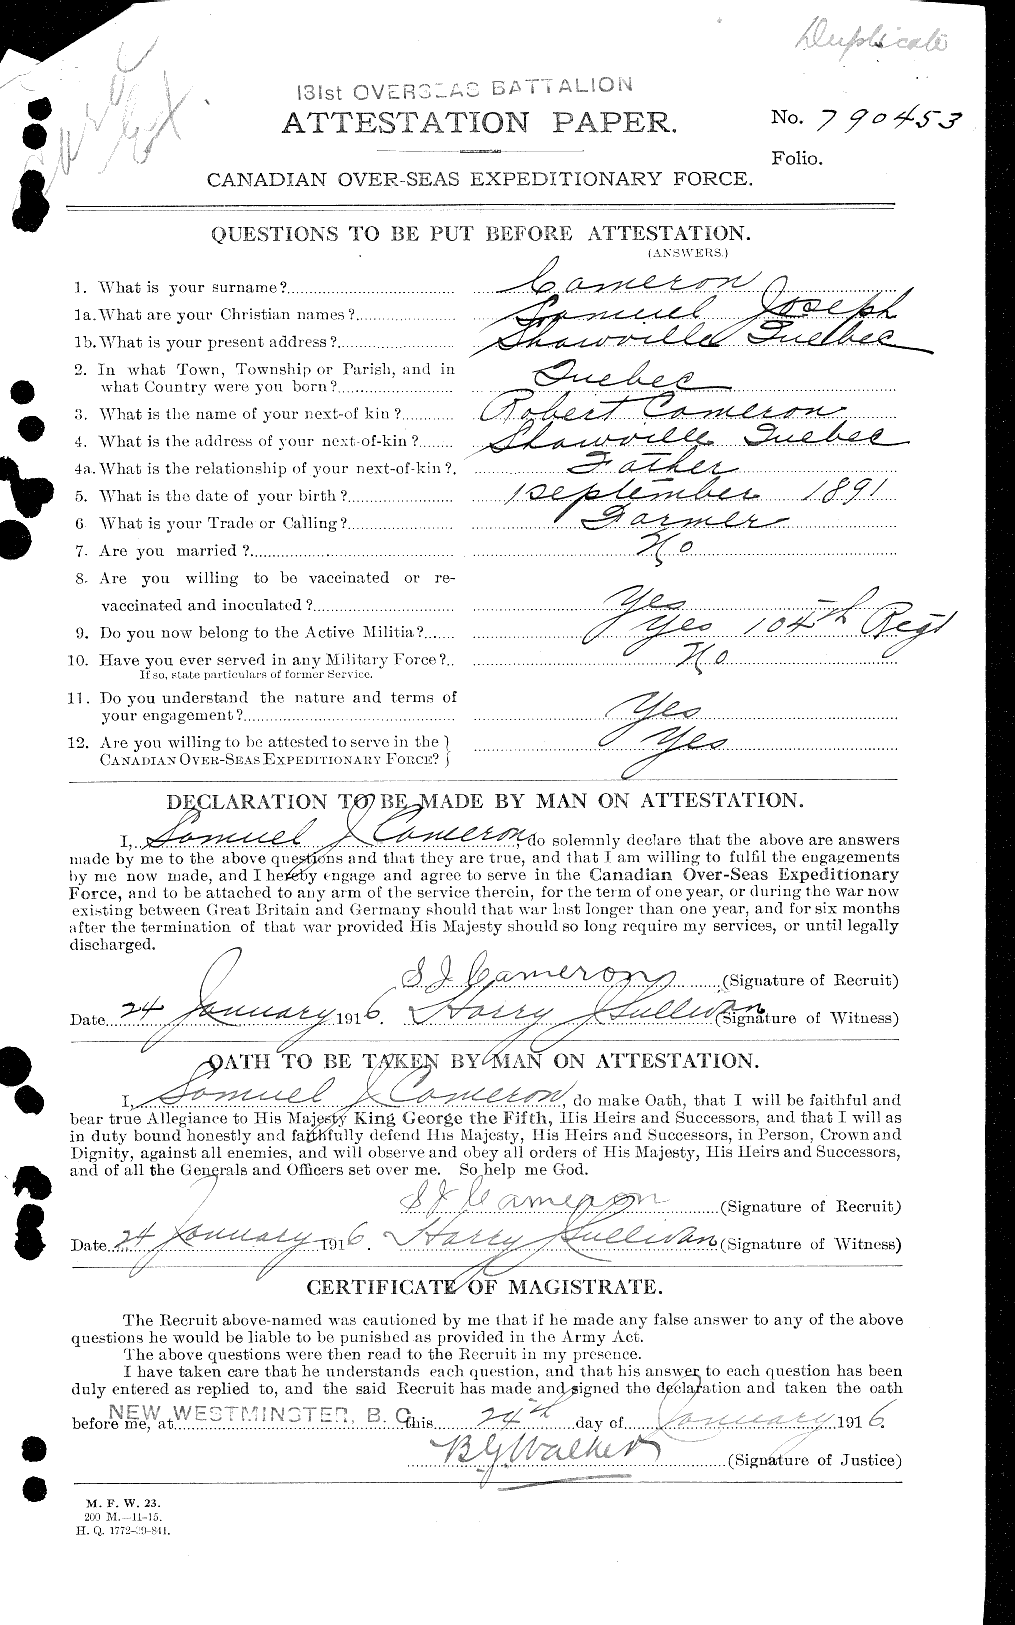 Personnel Records of the First World War - CEF 002542a